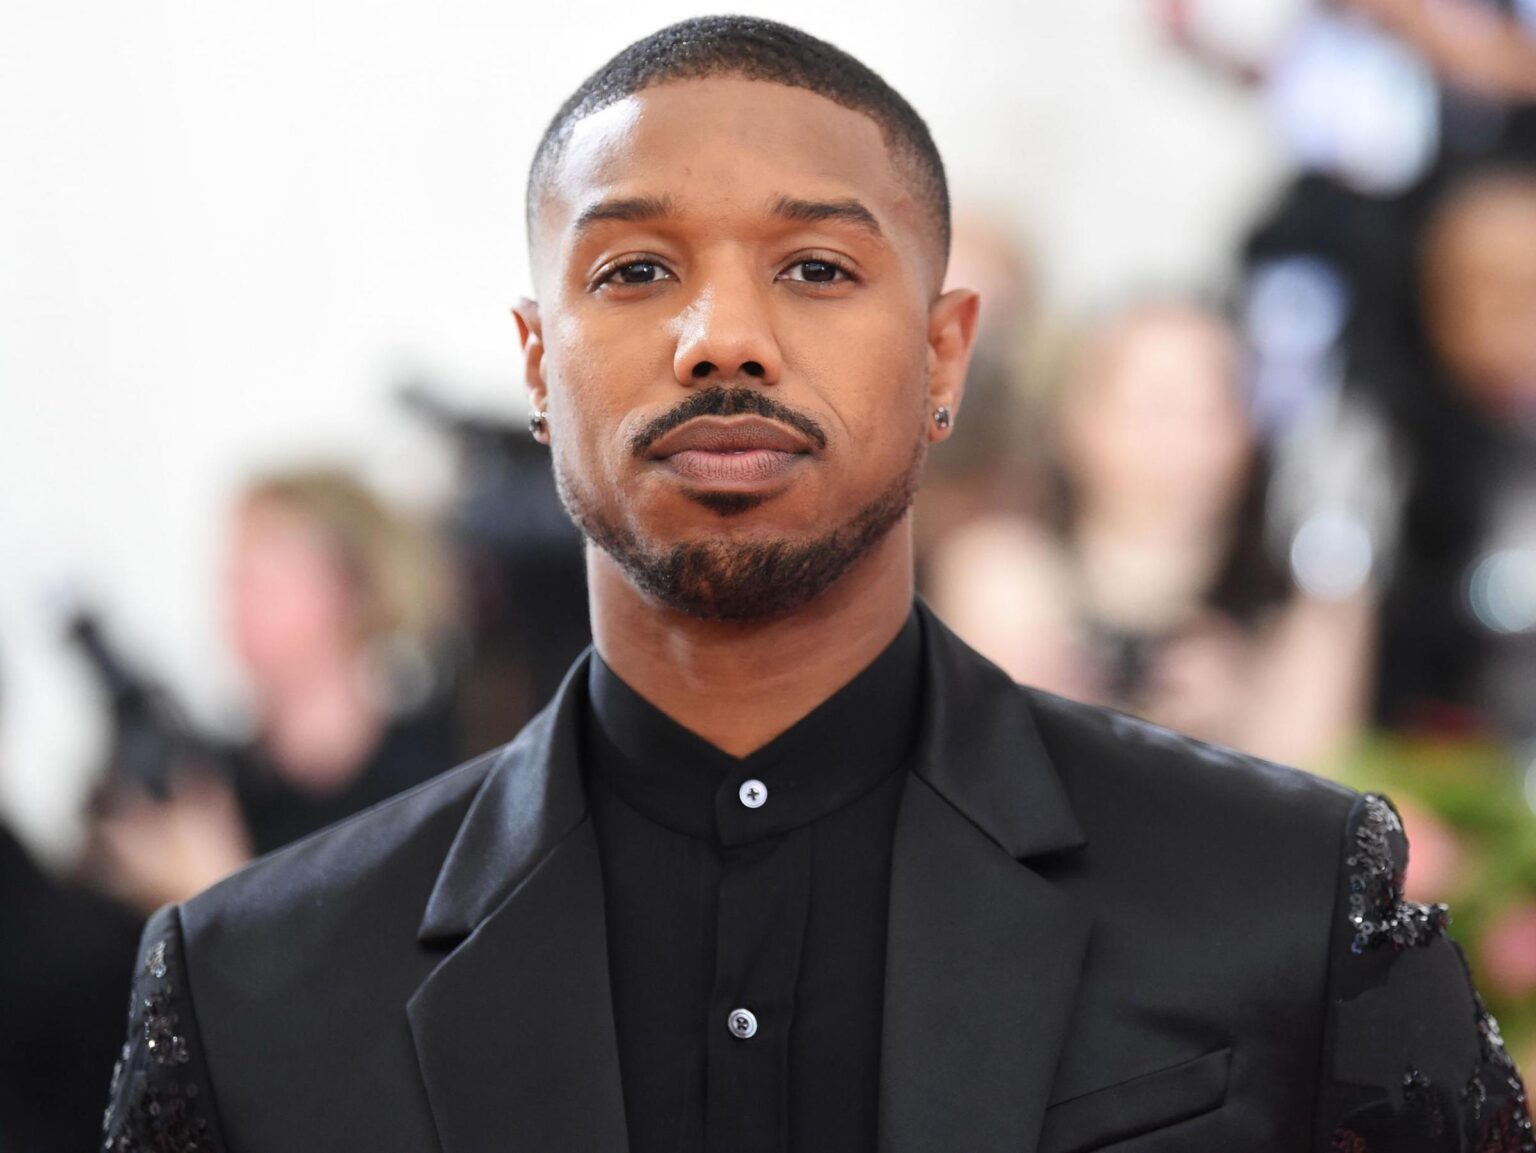 Fans are hoping that Michael B Jordan will be the next actor to don Superman's famous cape. Read what the actor said about the "flattering" fancast!